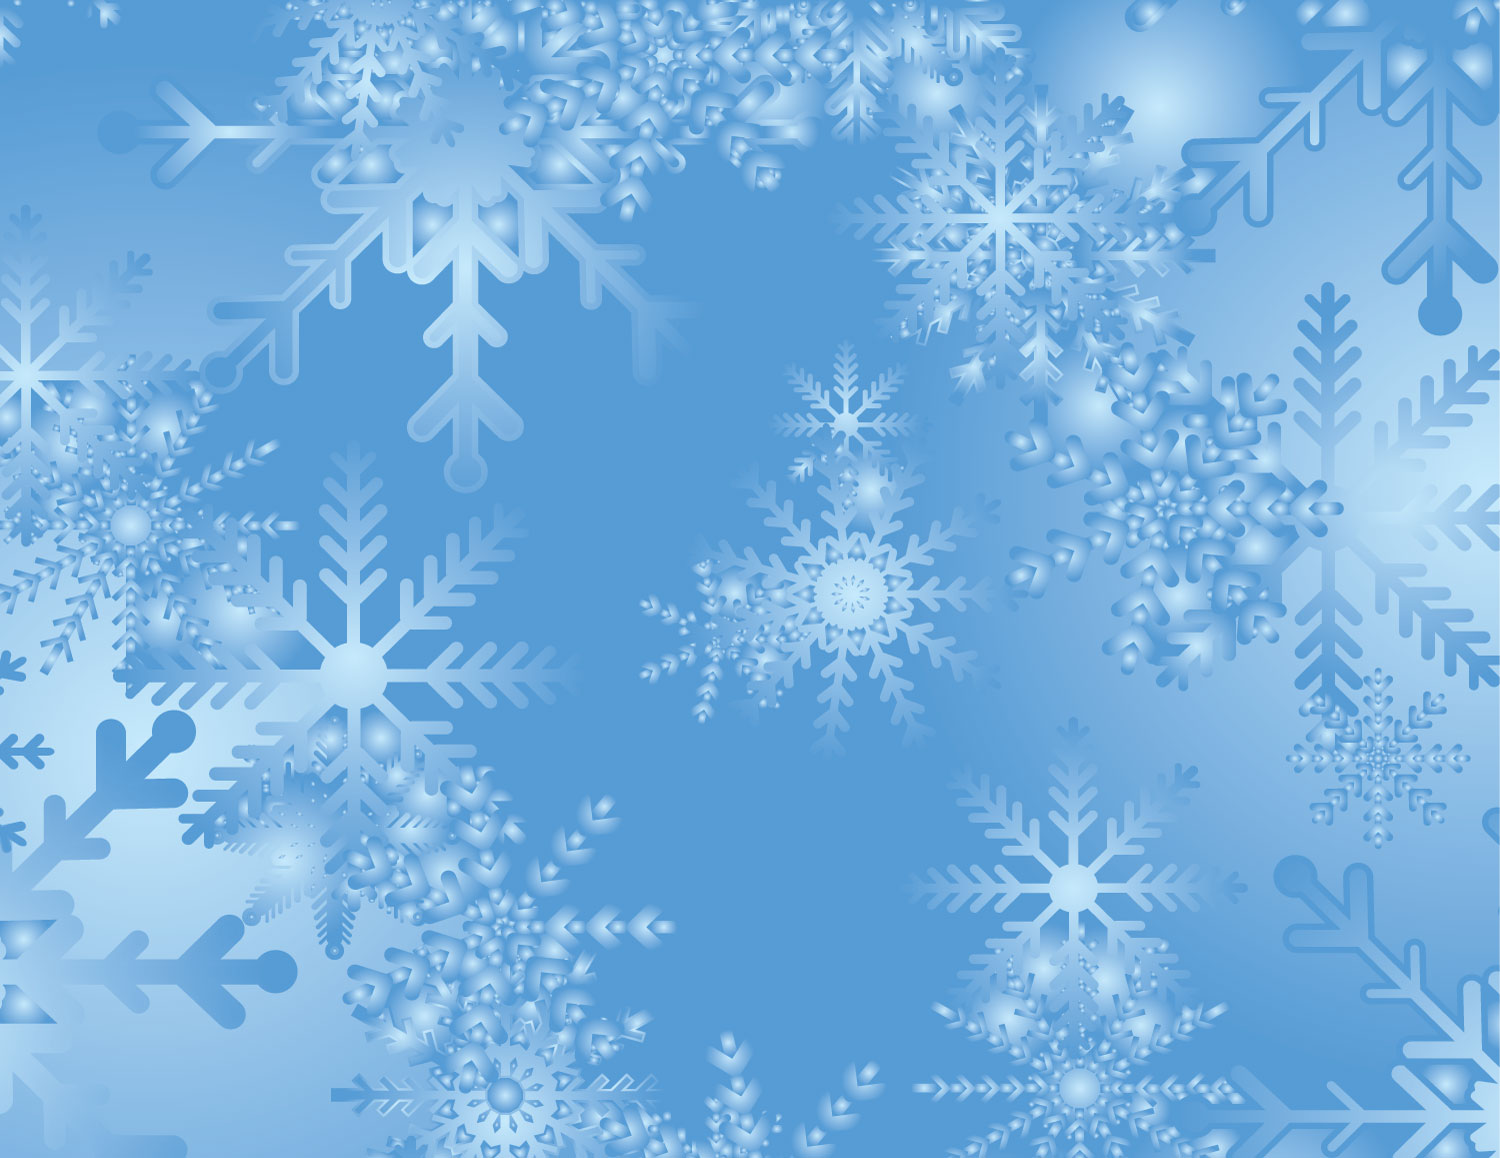 Blue background with snowflakes HD wallpapers free download   Wallpaperbetter